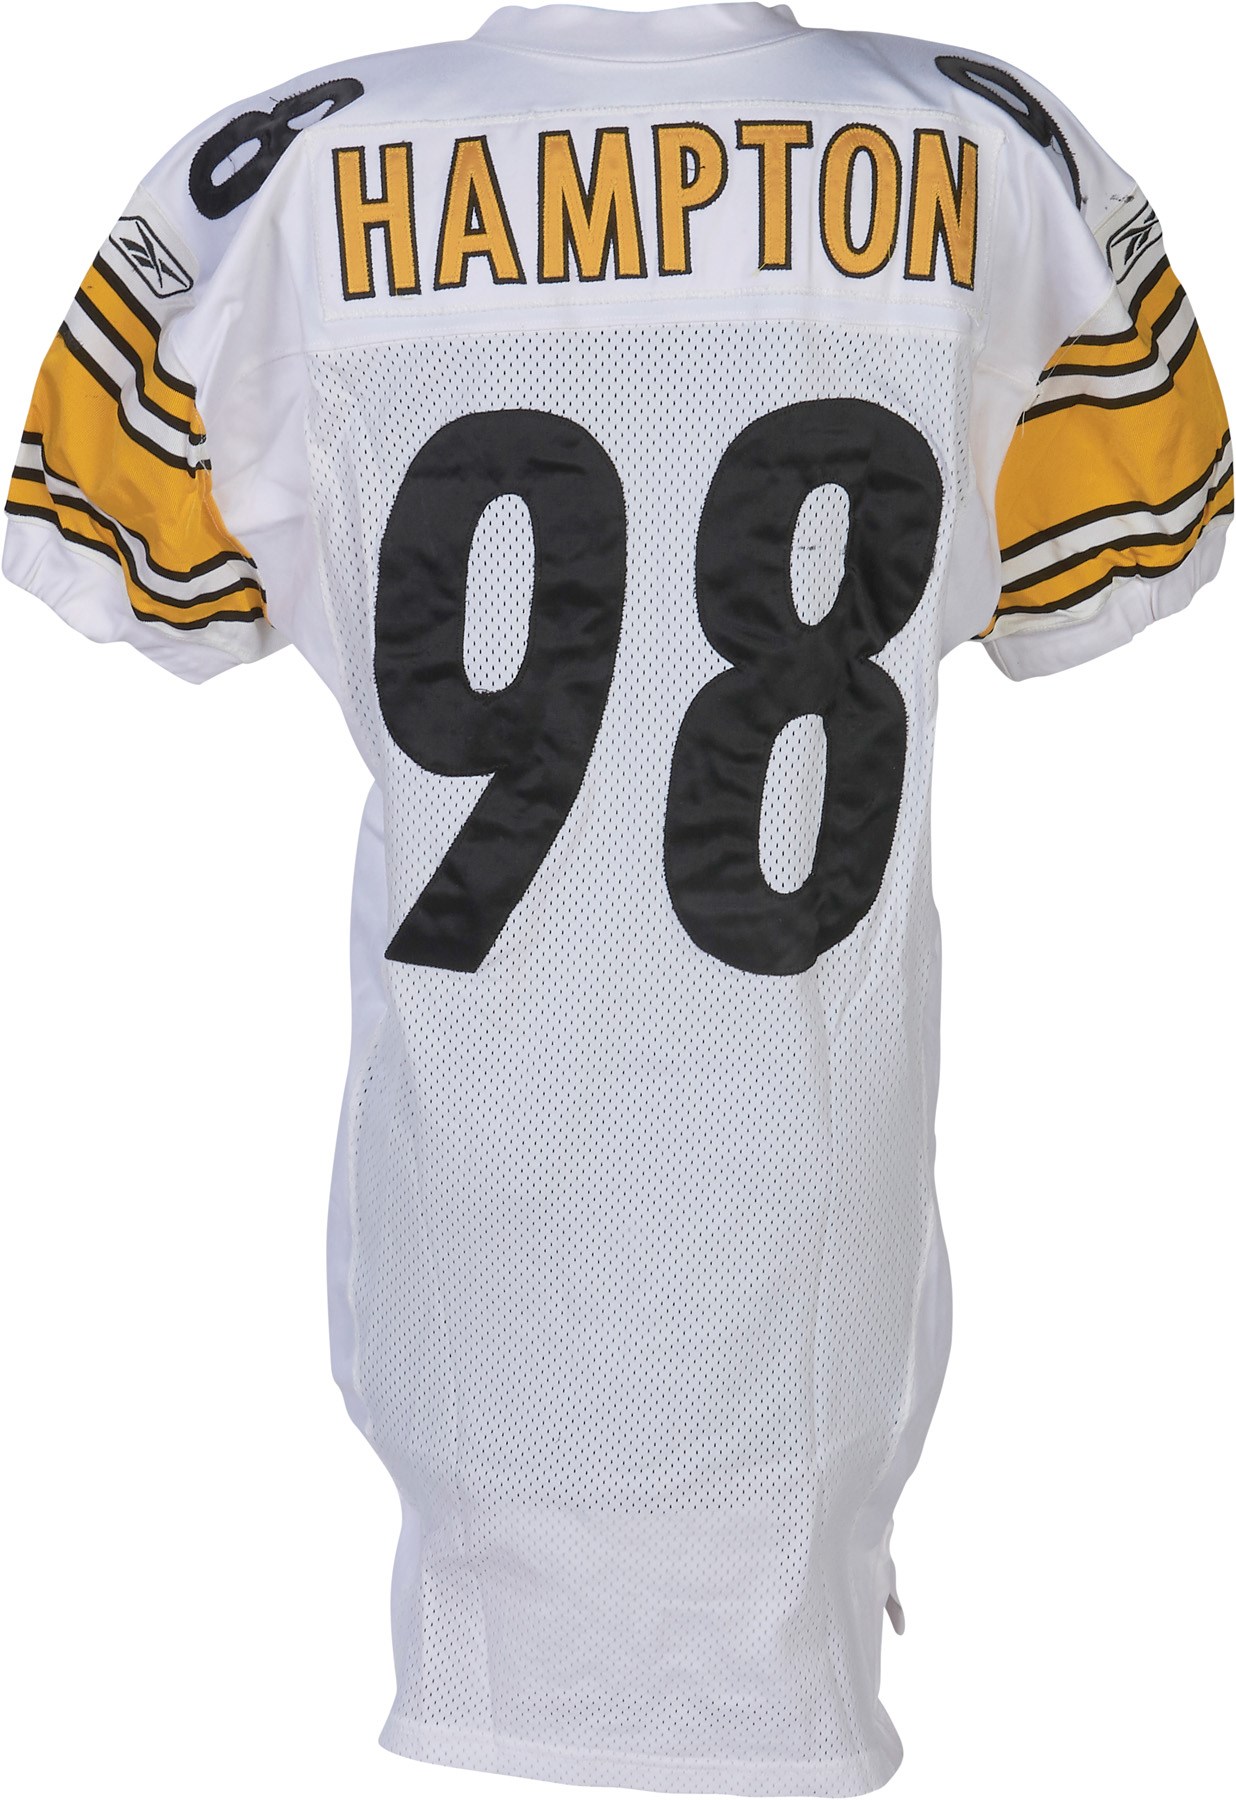 The Pittsburgh Steelers Game Worn Jersey Archive - 2001 Casey Hampton Pittsburgh Steelers Game Worn Jersey (Photo-Matched)